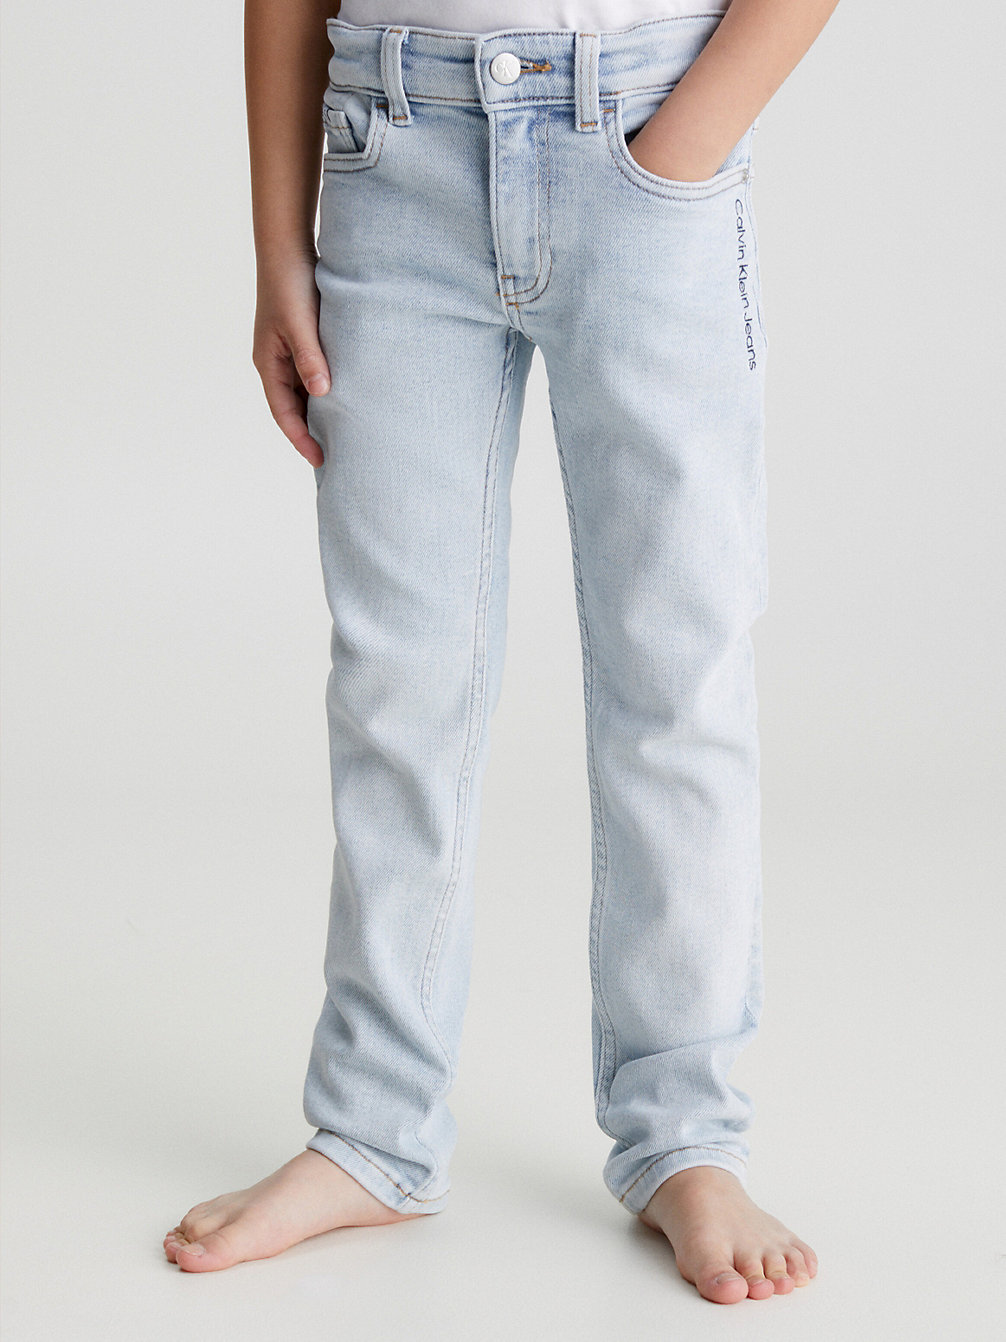 LIGHT BLEACHED STRETCH Mid Rise Slim Jeans undefined boys Calvin Klein